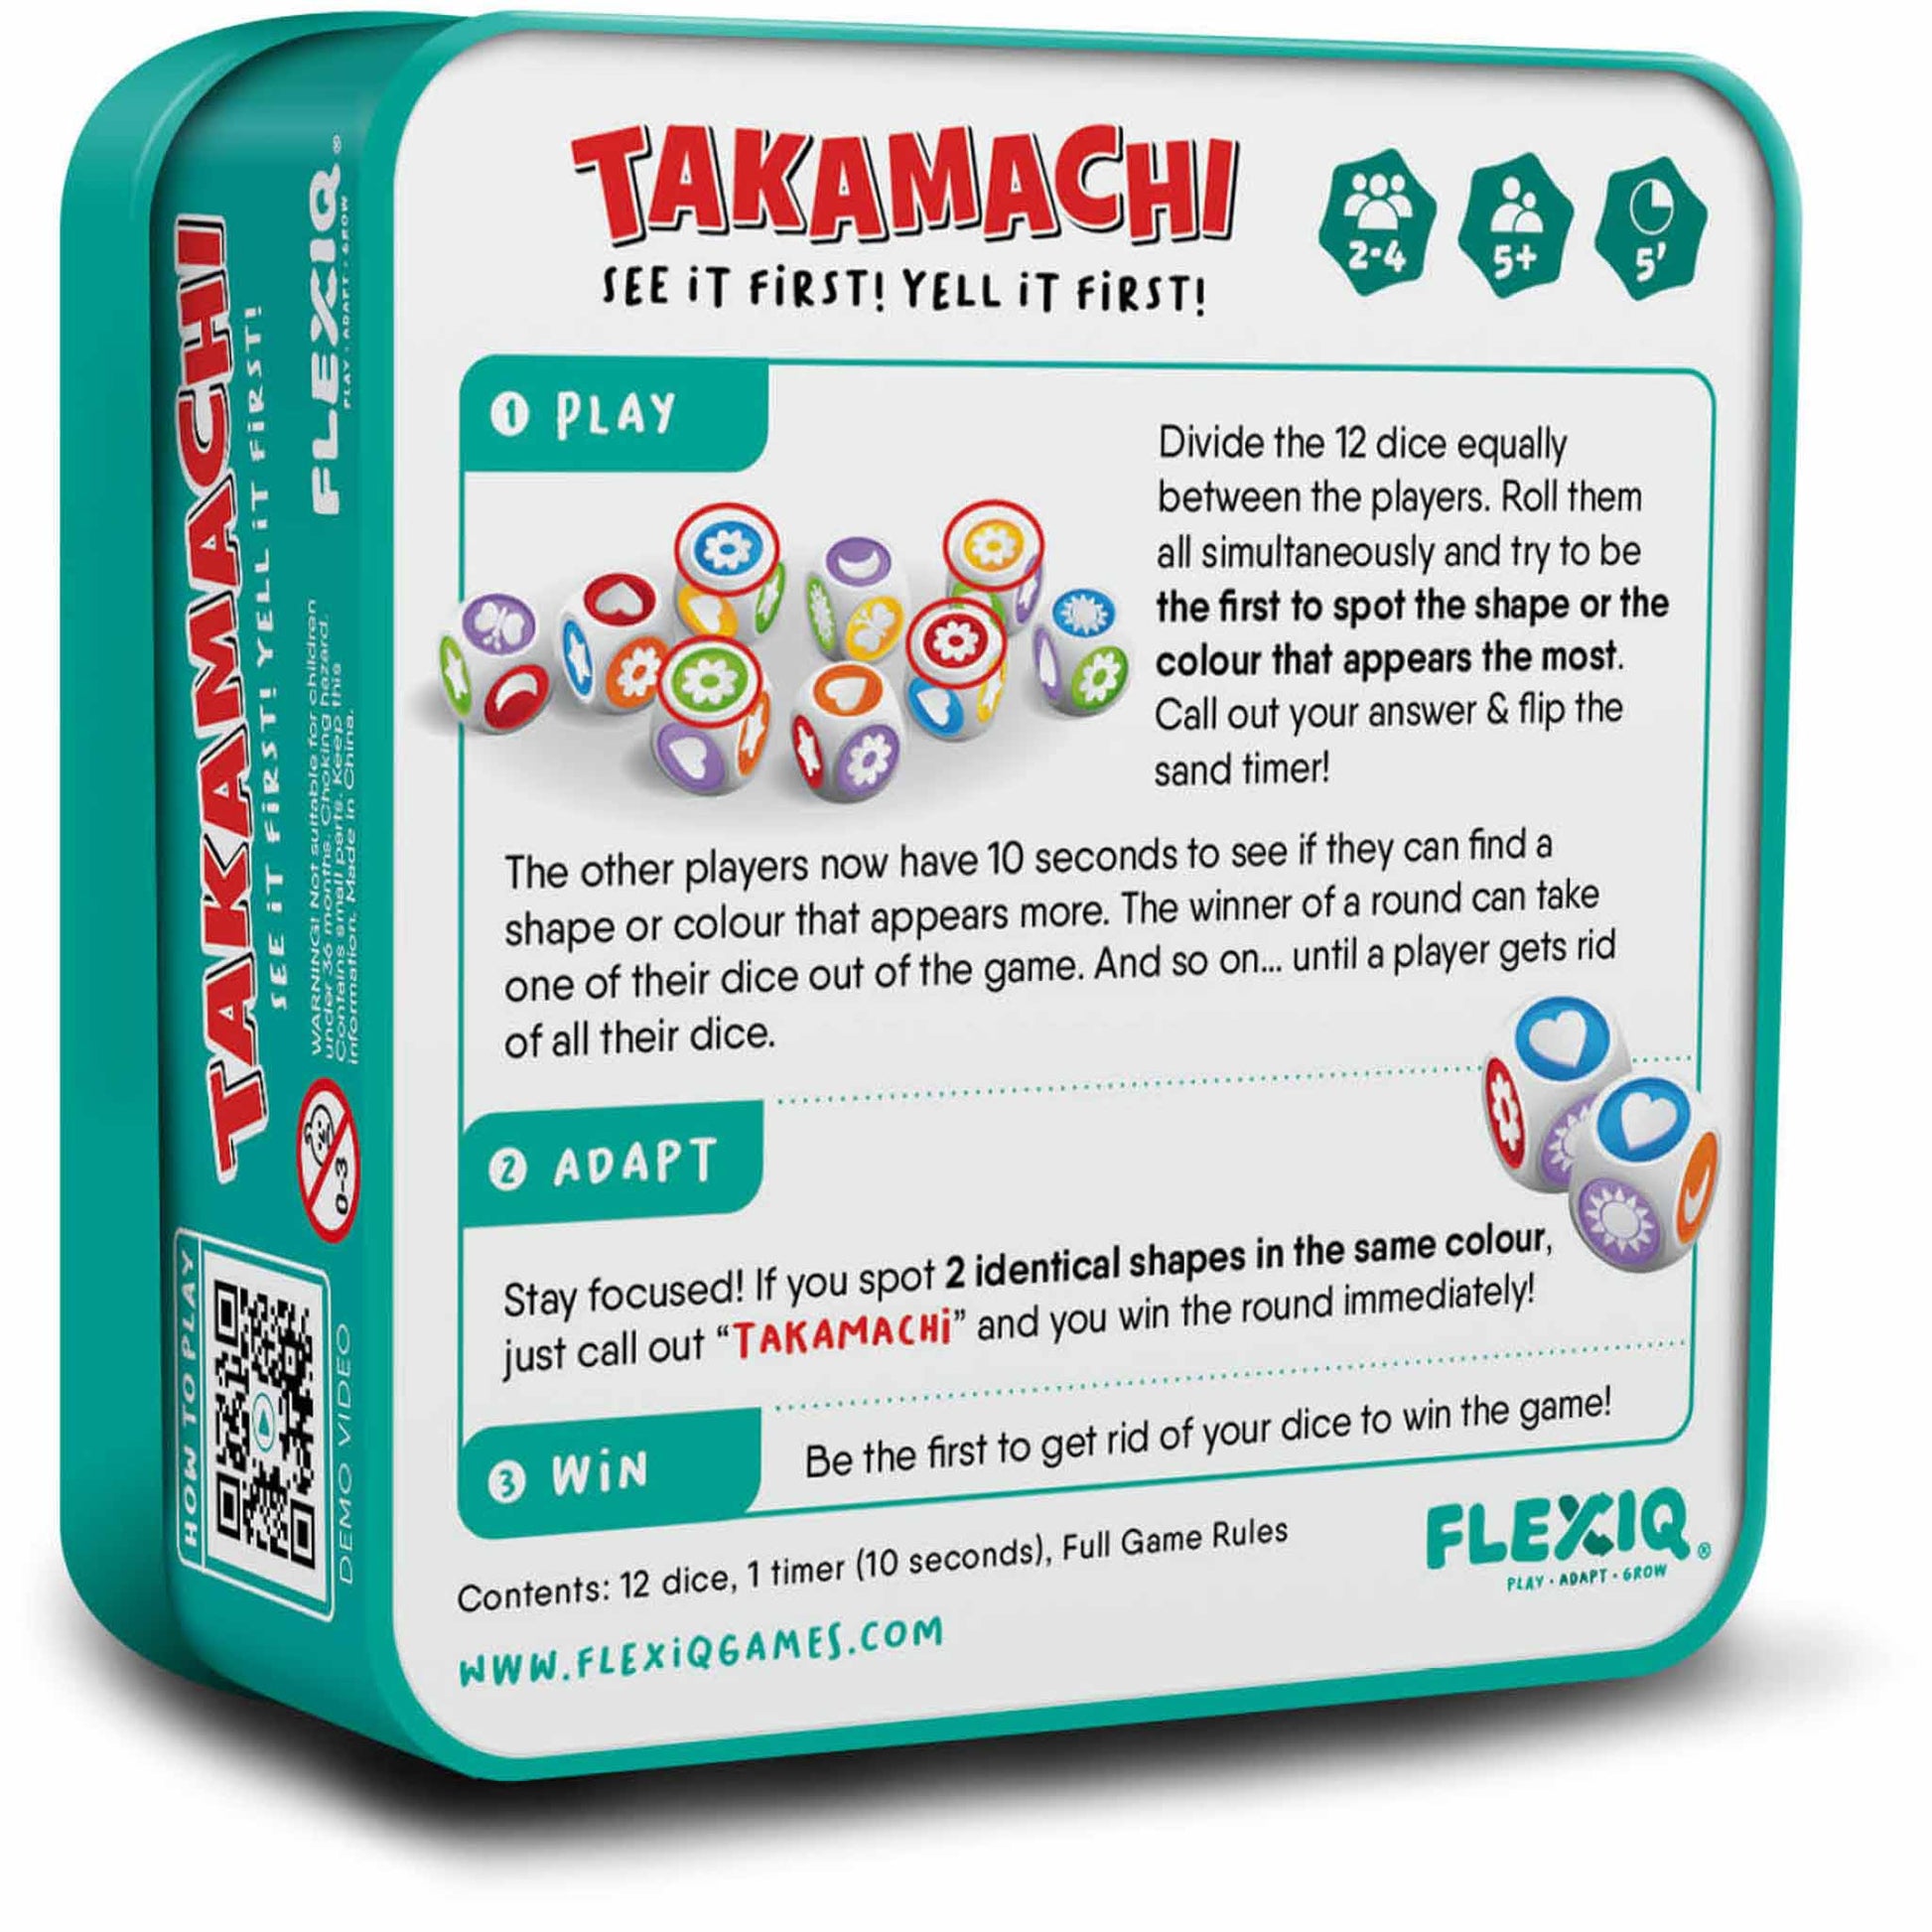 Photo of back of box of Takamachi reaction speed game by FLEXIQ.